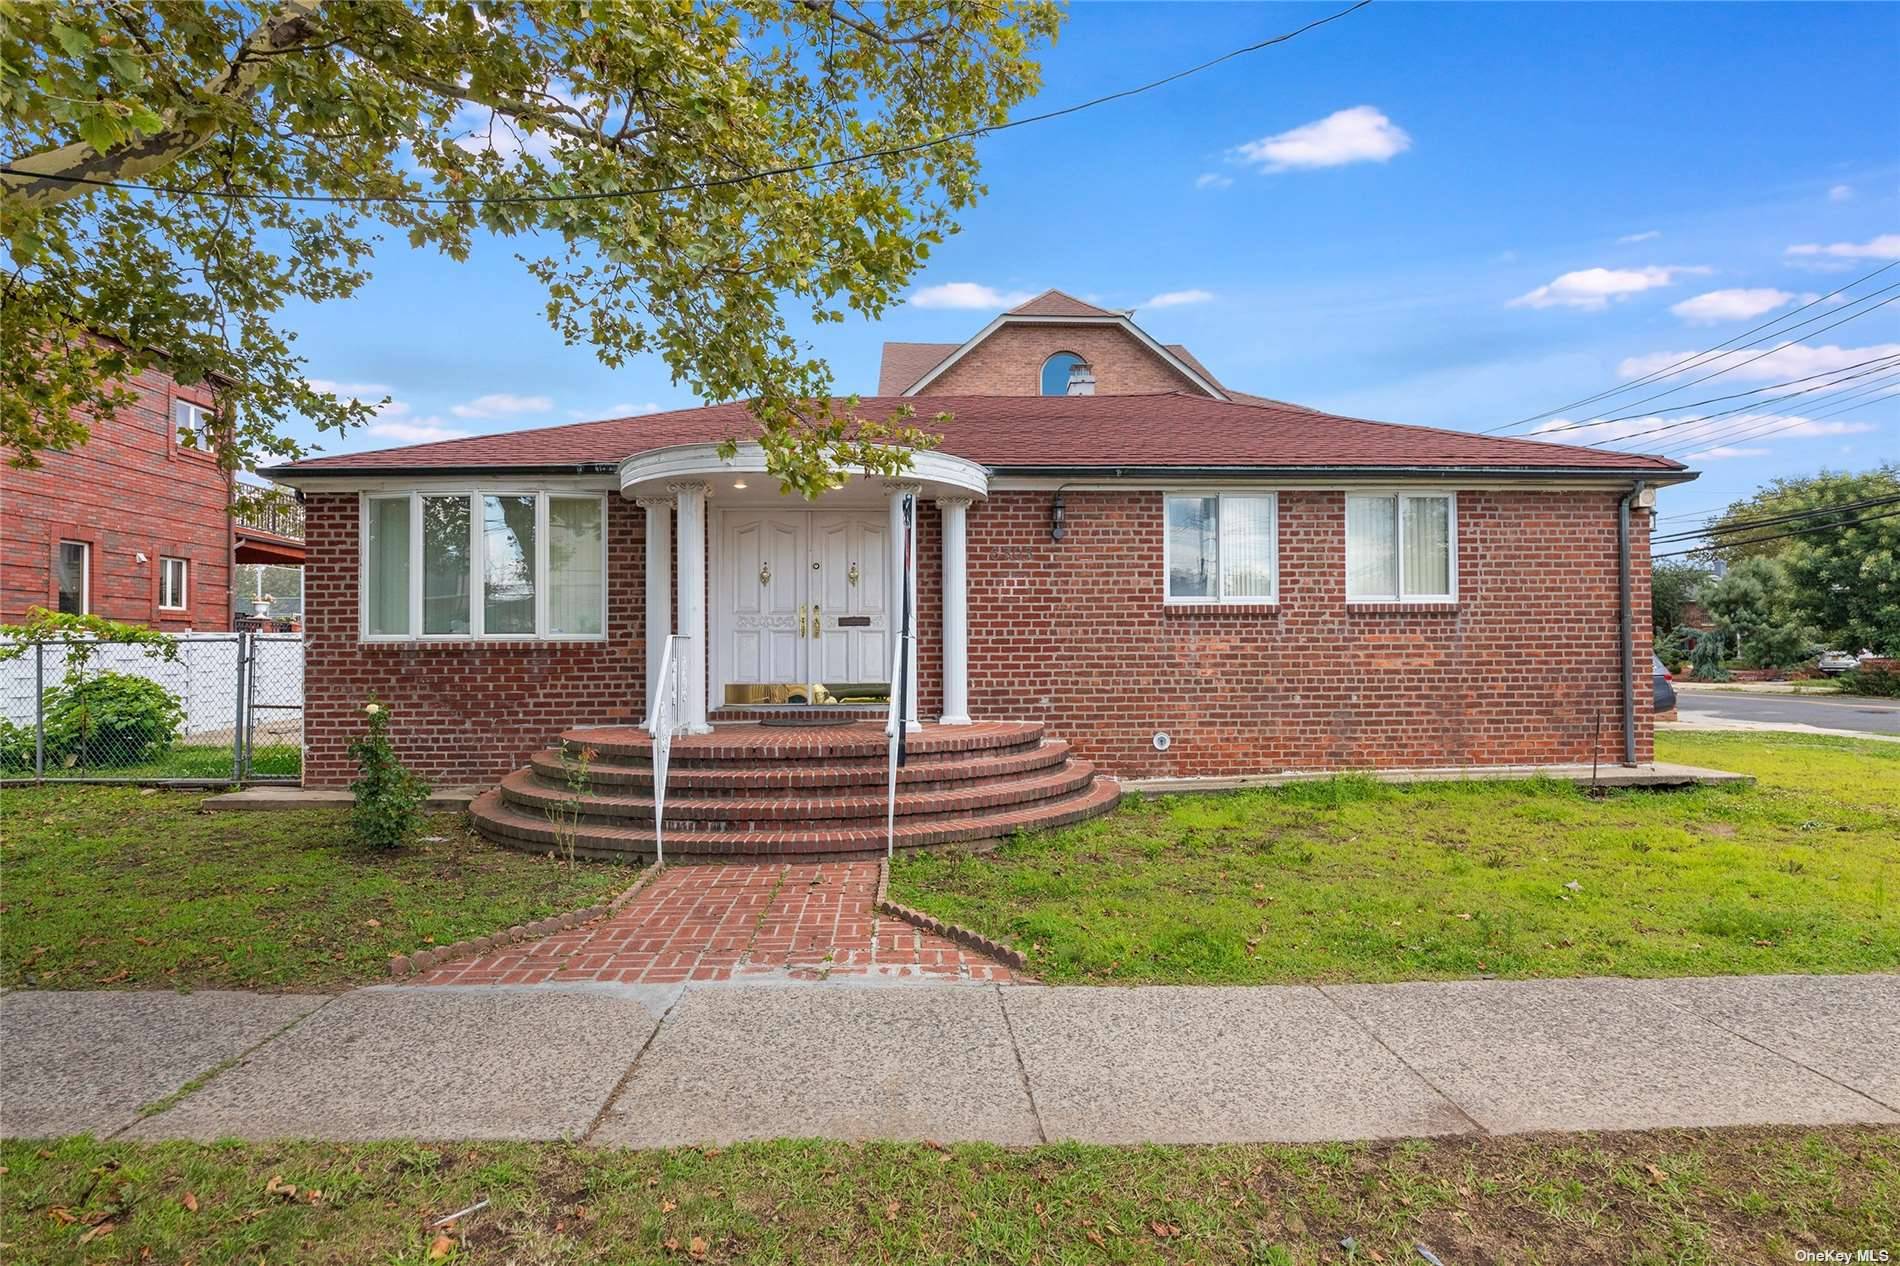 Spacious charming one family brick ranch home with two entrances, fronts and side on a 50 X 90 lot.